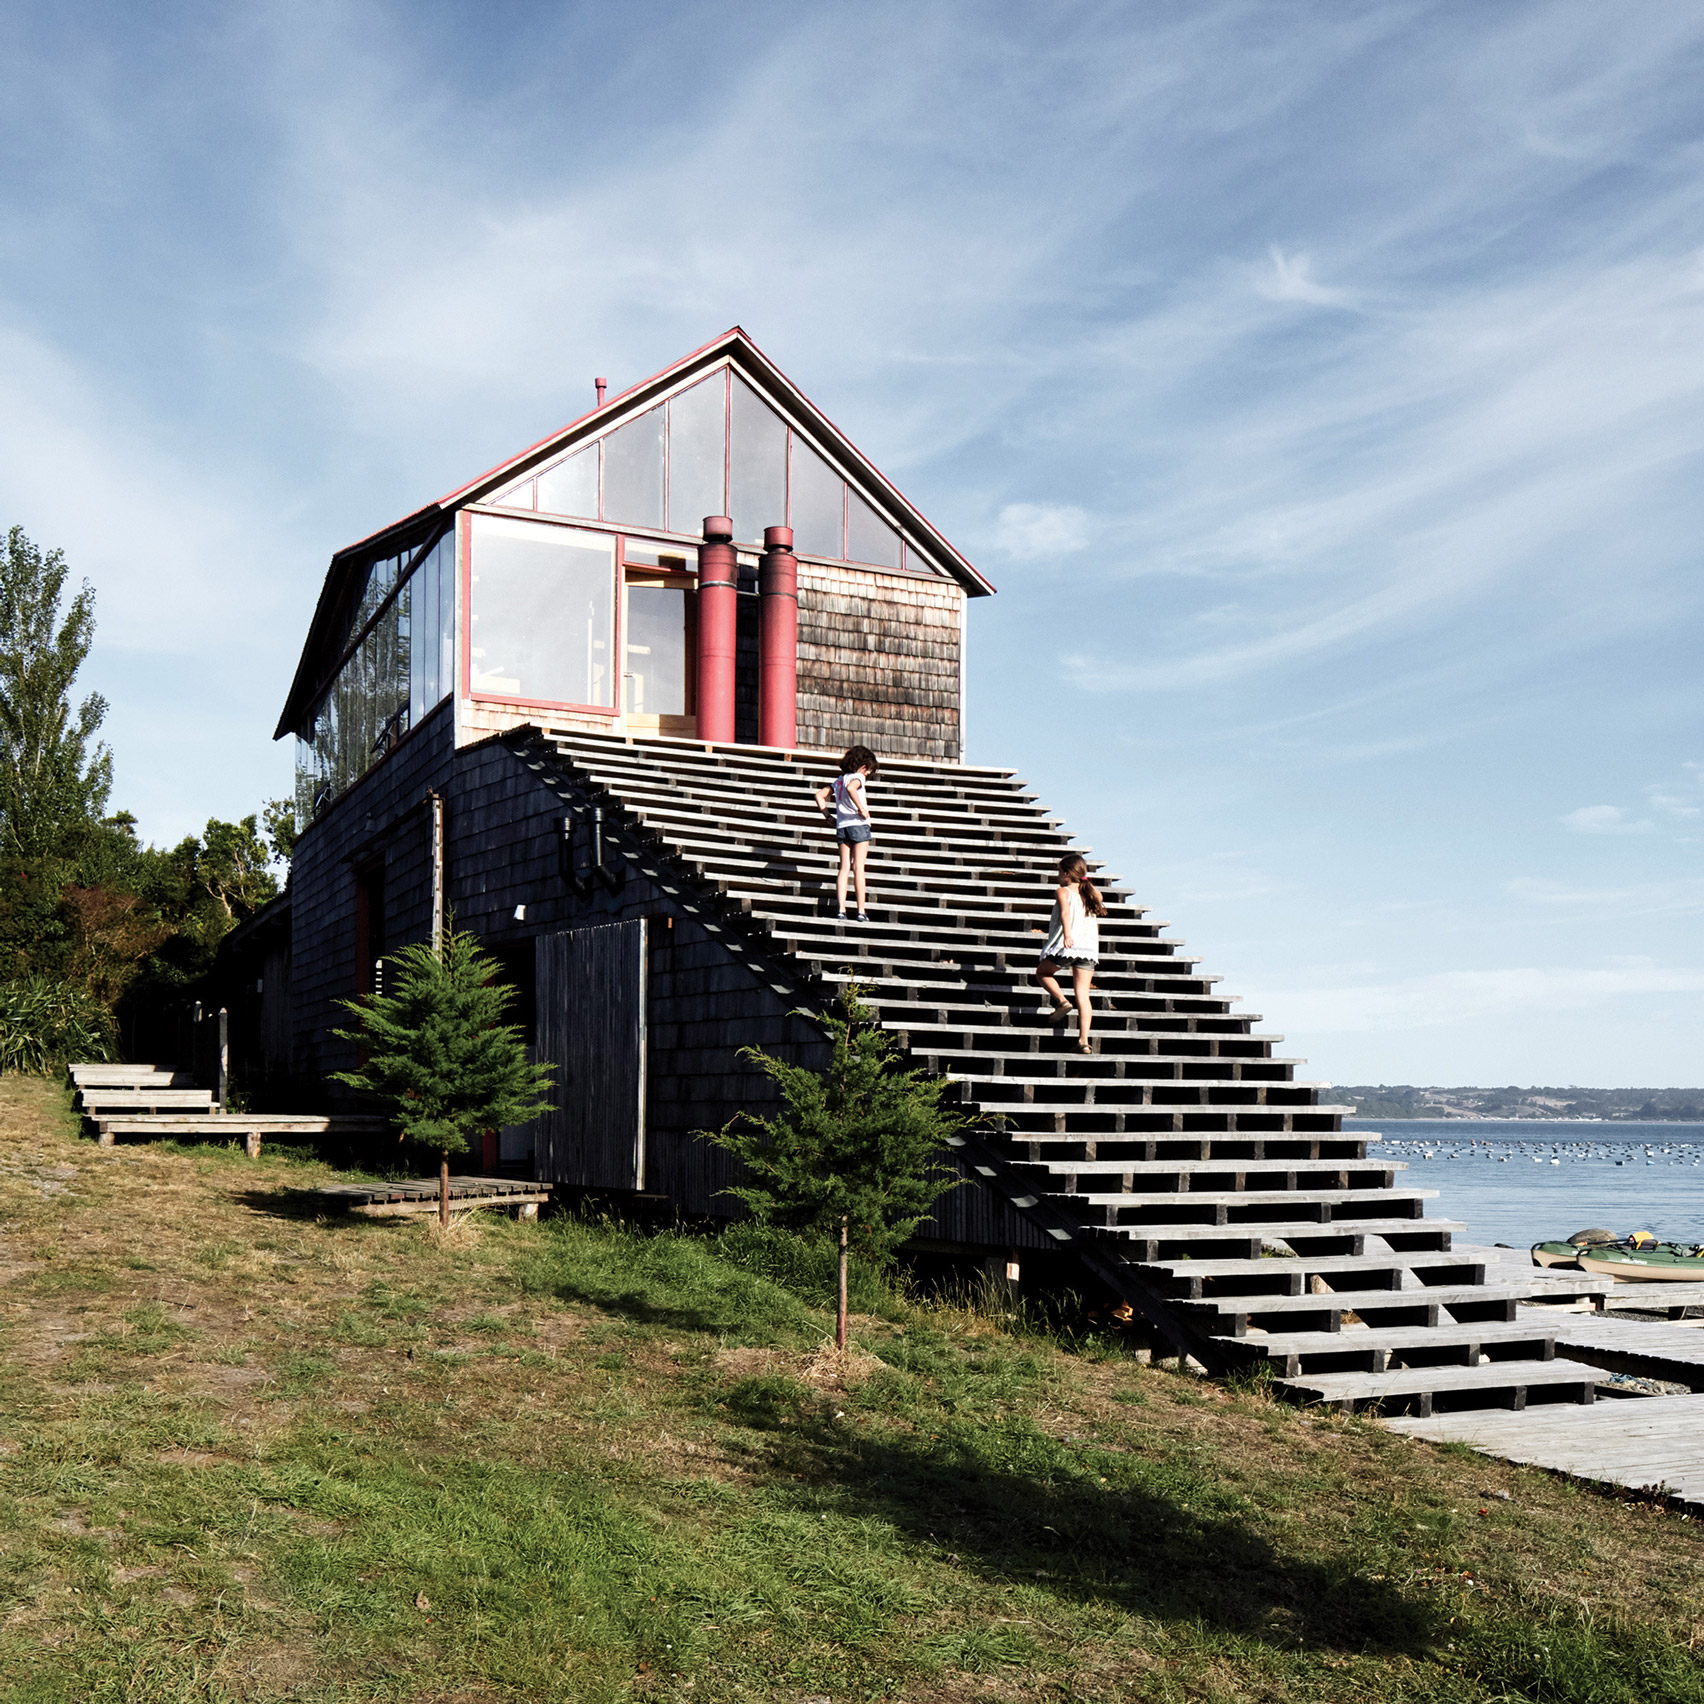 Dezeen's top 10 staircases of 2019: Isla Lebe, Chile,by Guillermo Acuña